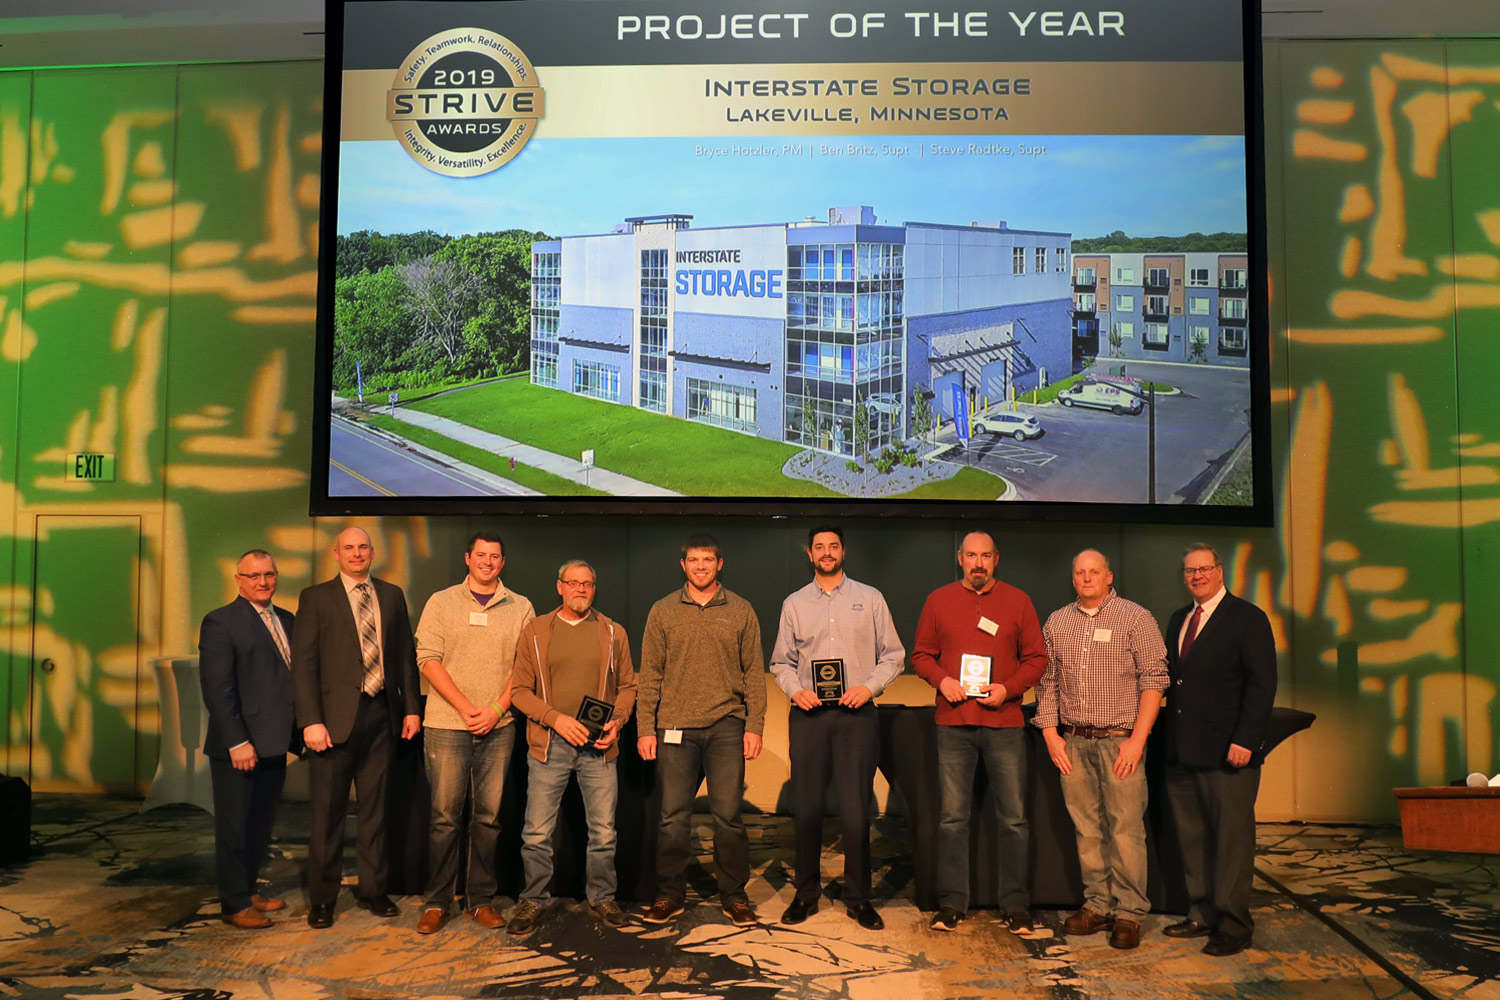 2019 Project of the Year: Interstate Storage